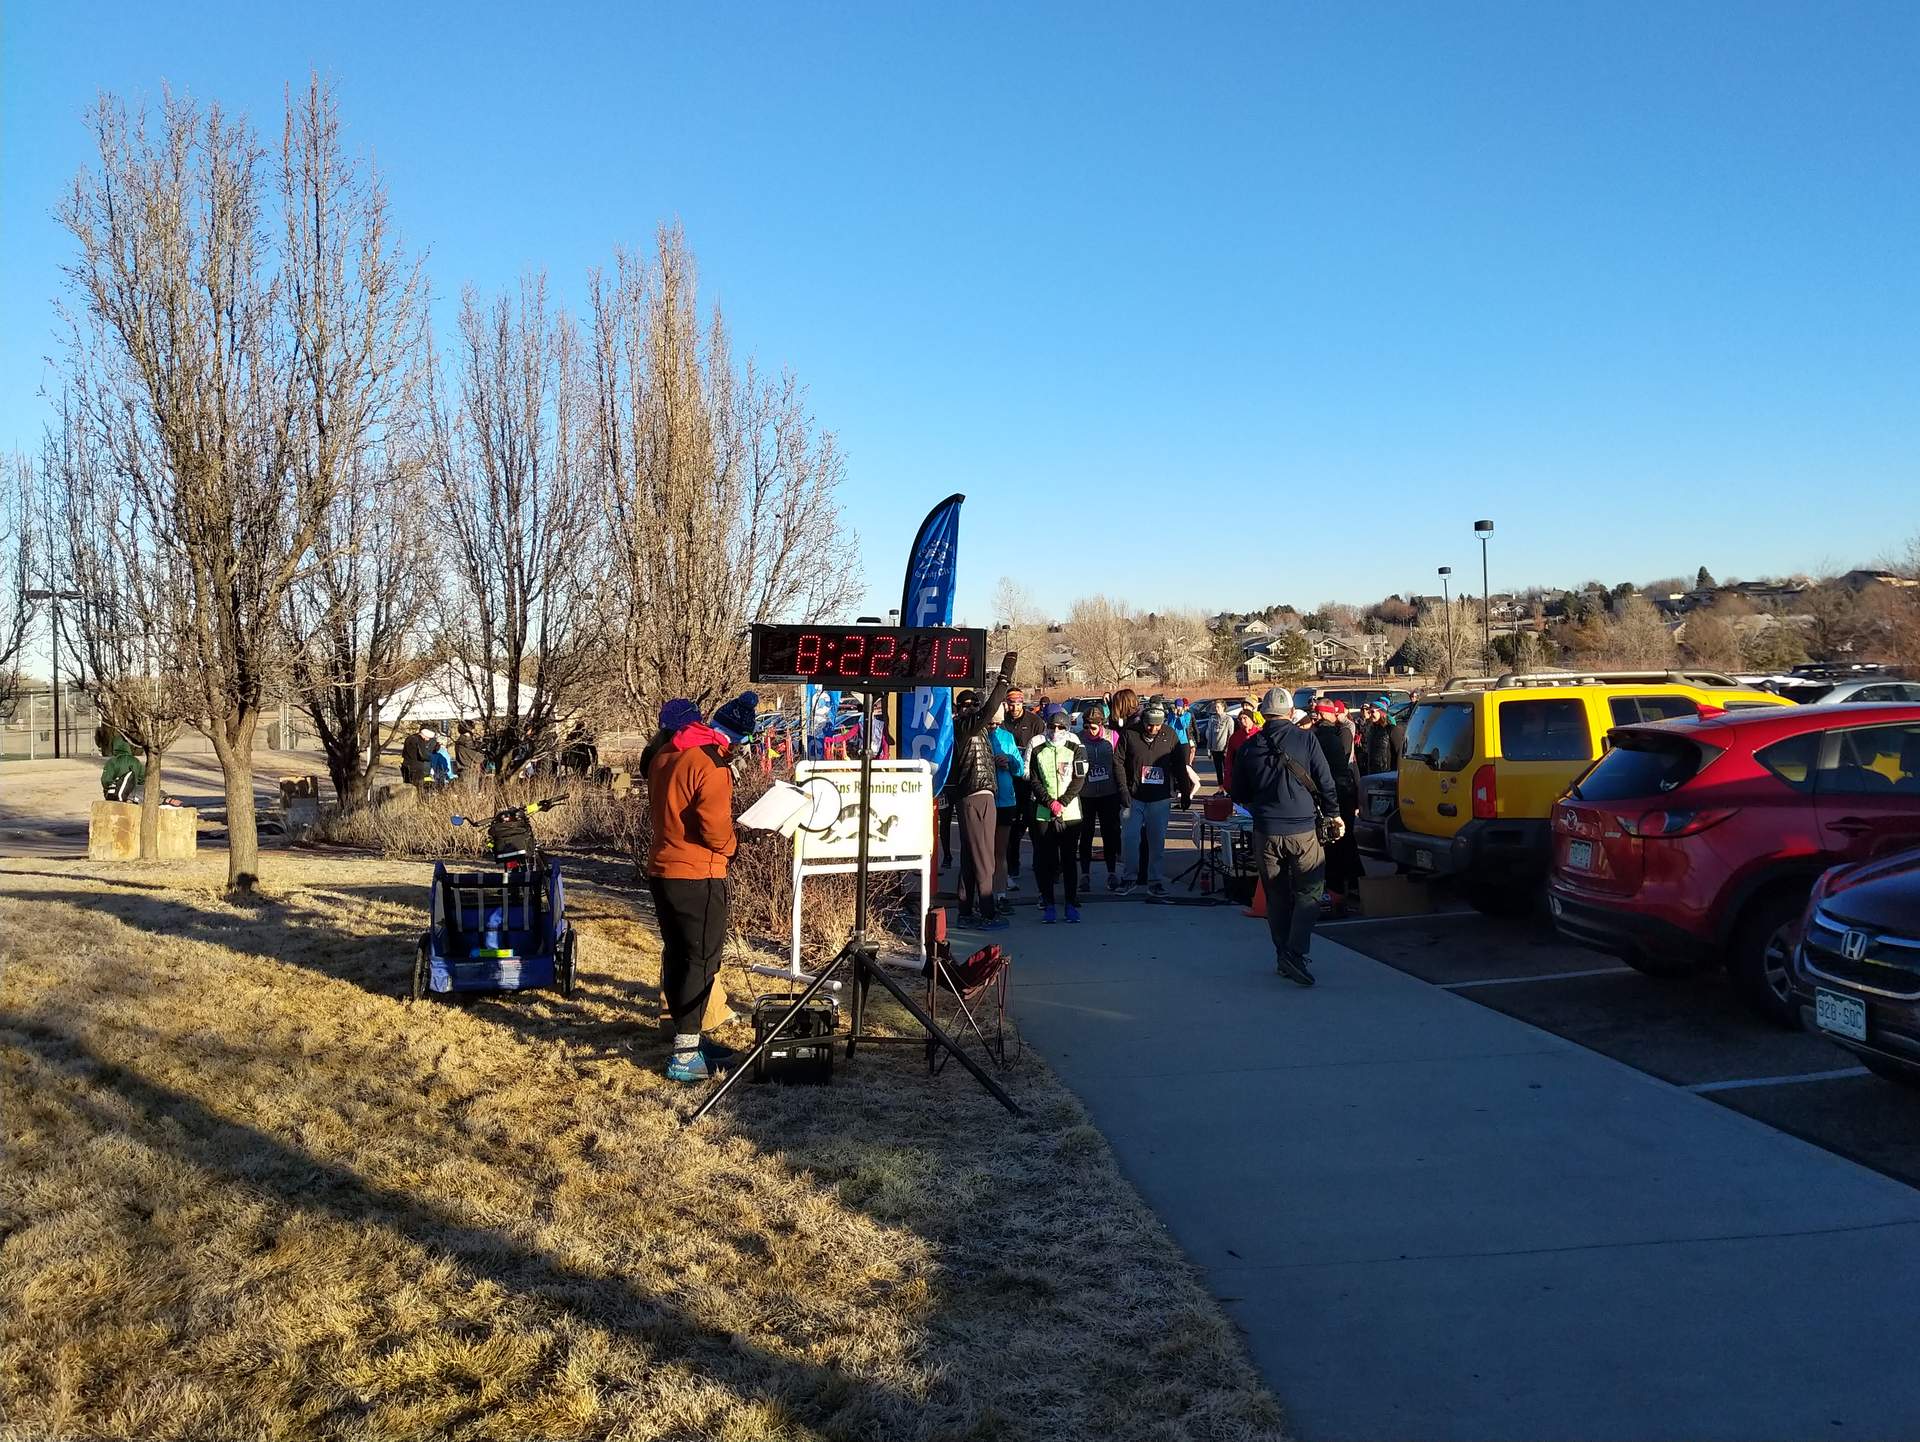 Runners at the start of the 2019 Fossil Creek Park 5-kilometer Tortoise & Hare race put on by the Fort Collins Running Club.